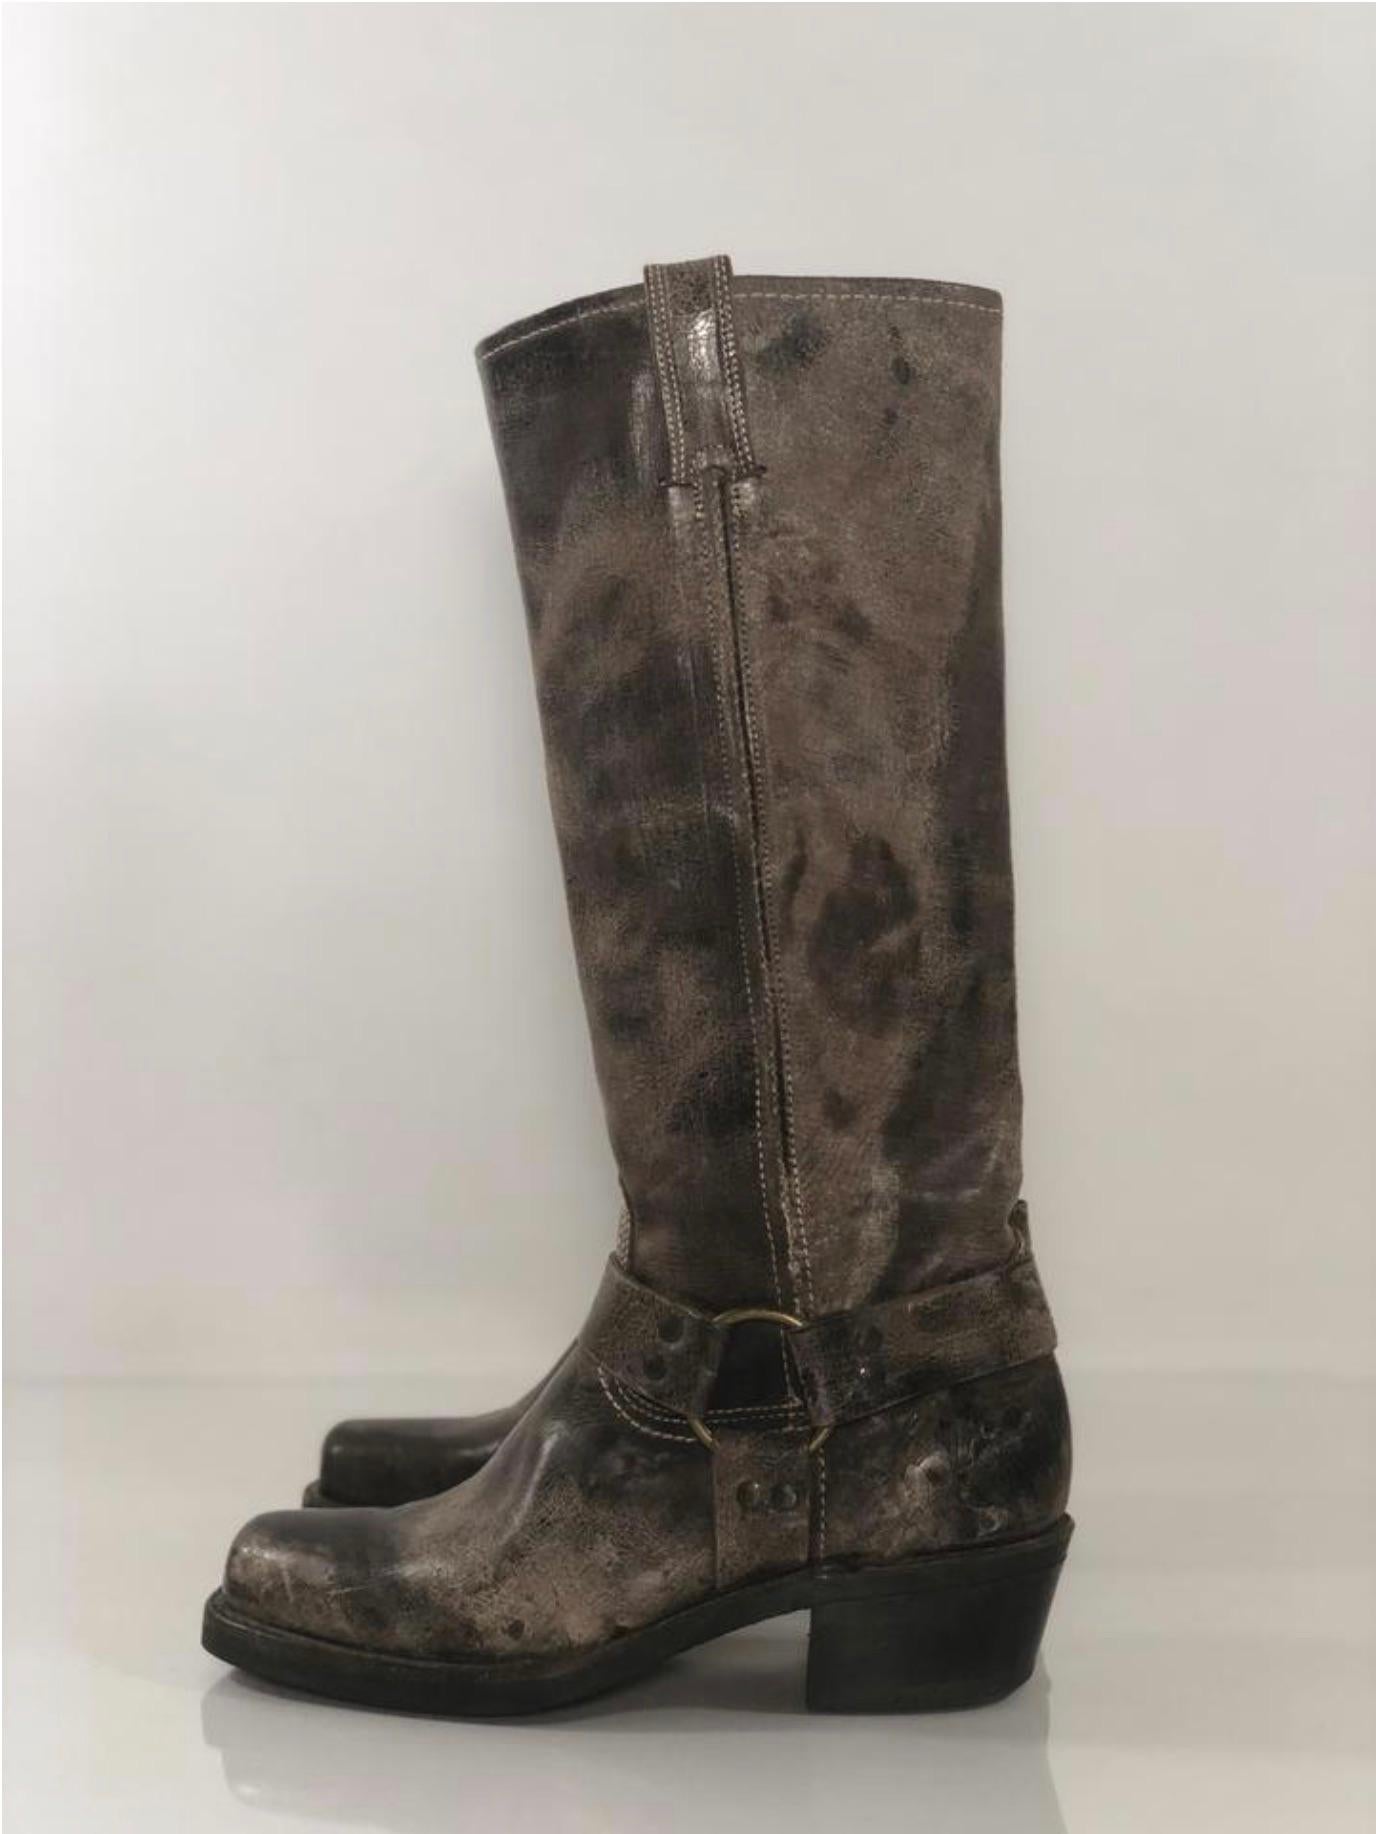 Frye Weather Leather Tall Cowboy Boots In Excellent Condition For Sale In Saint Charles, IL